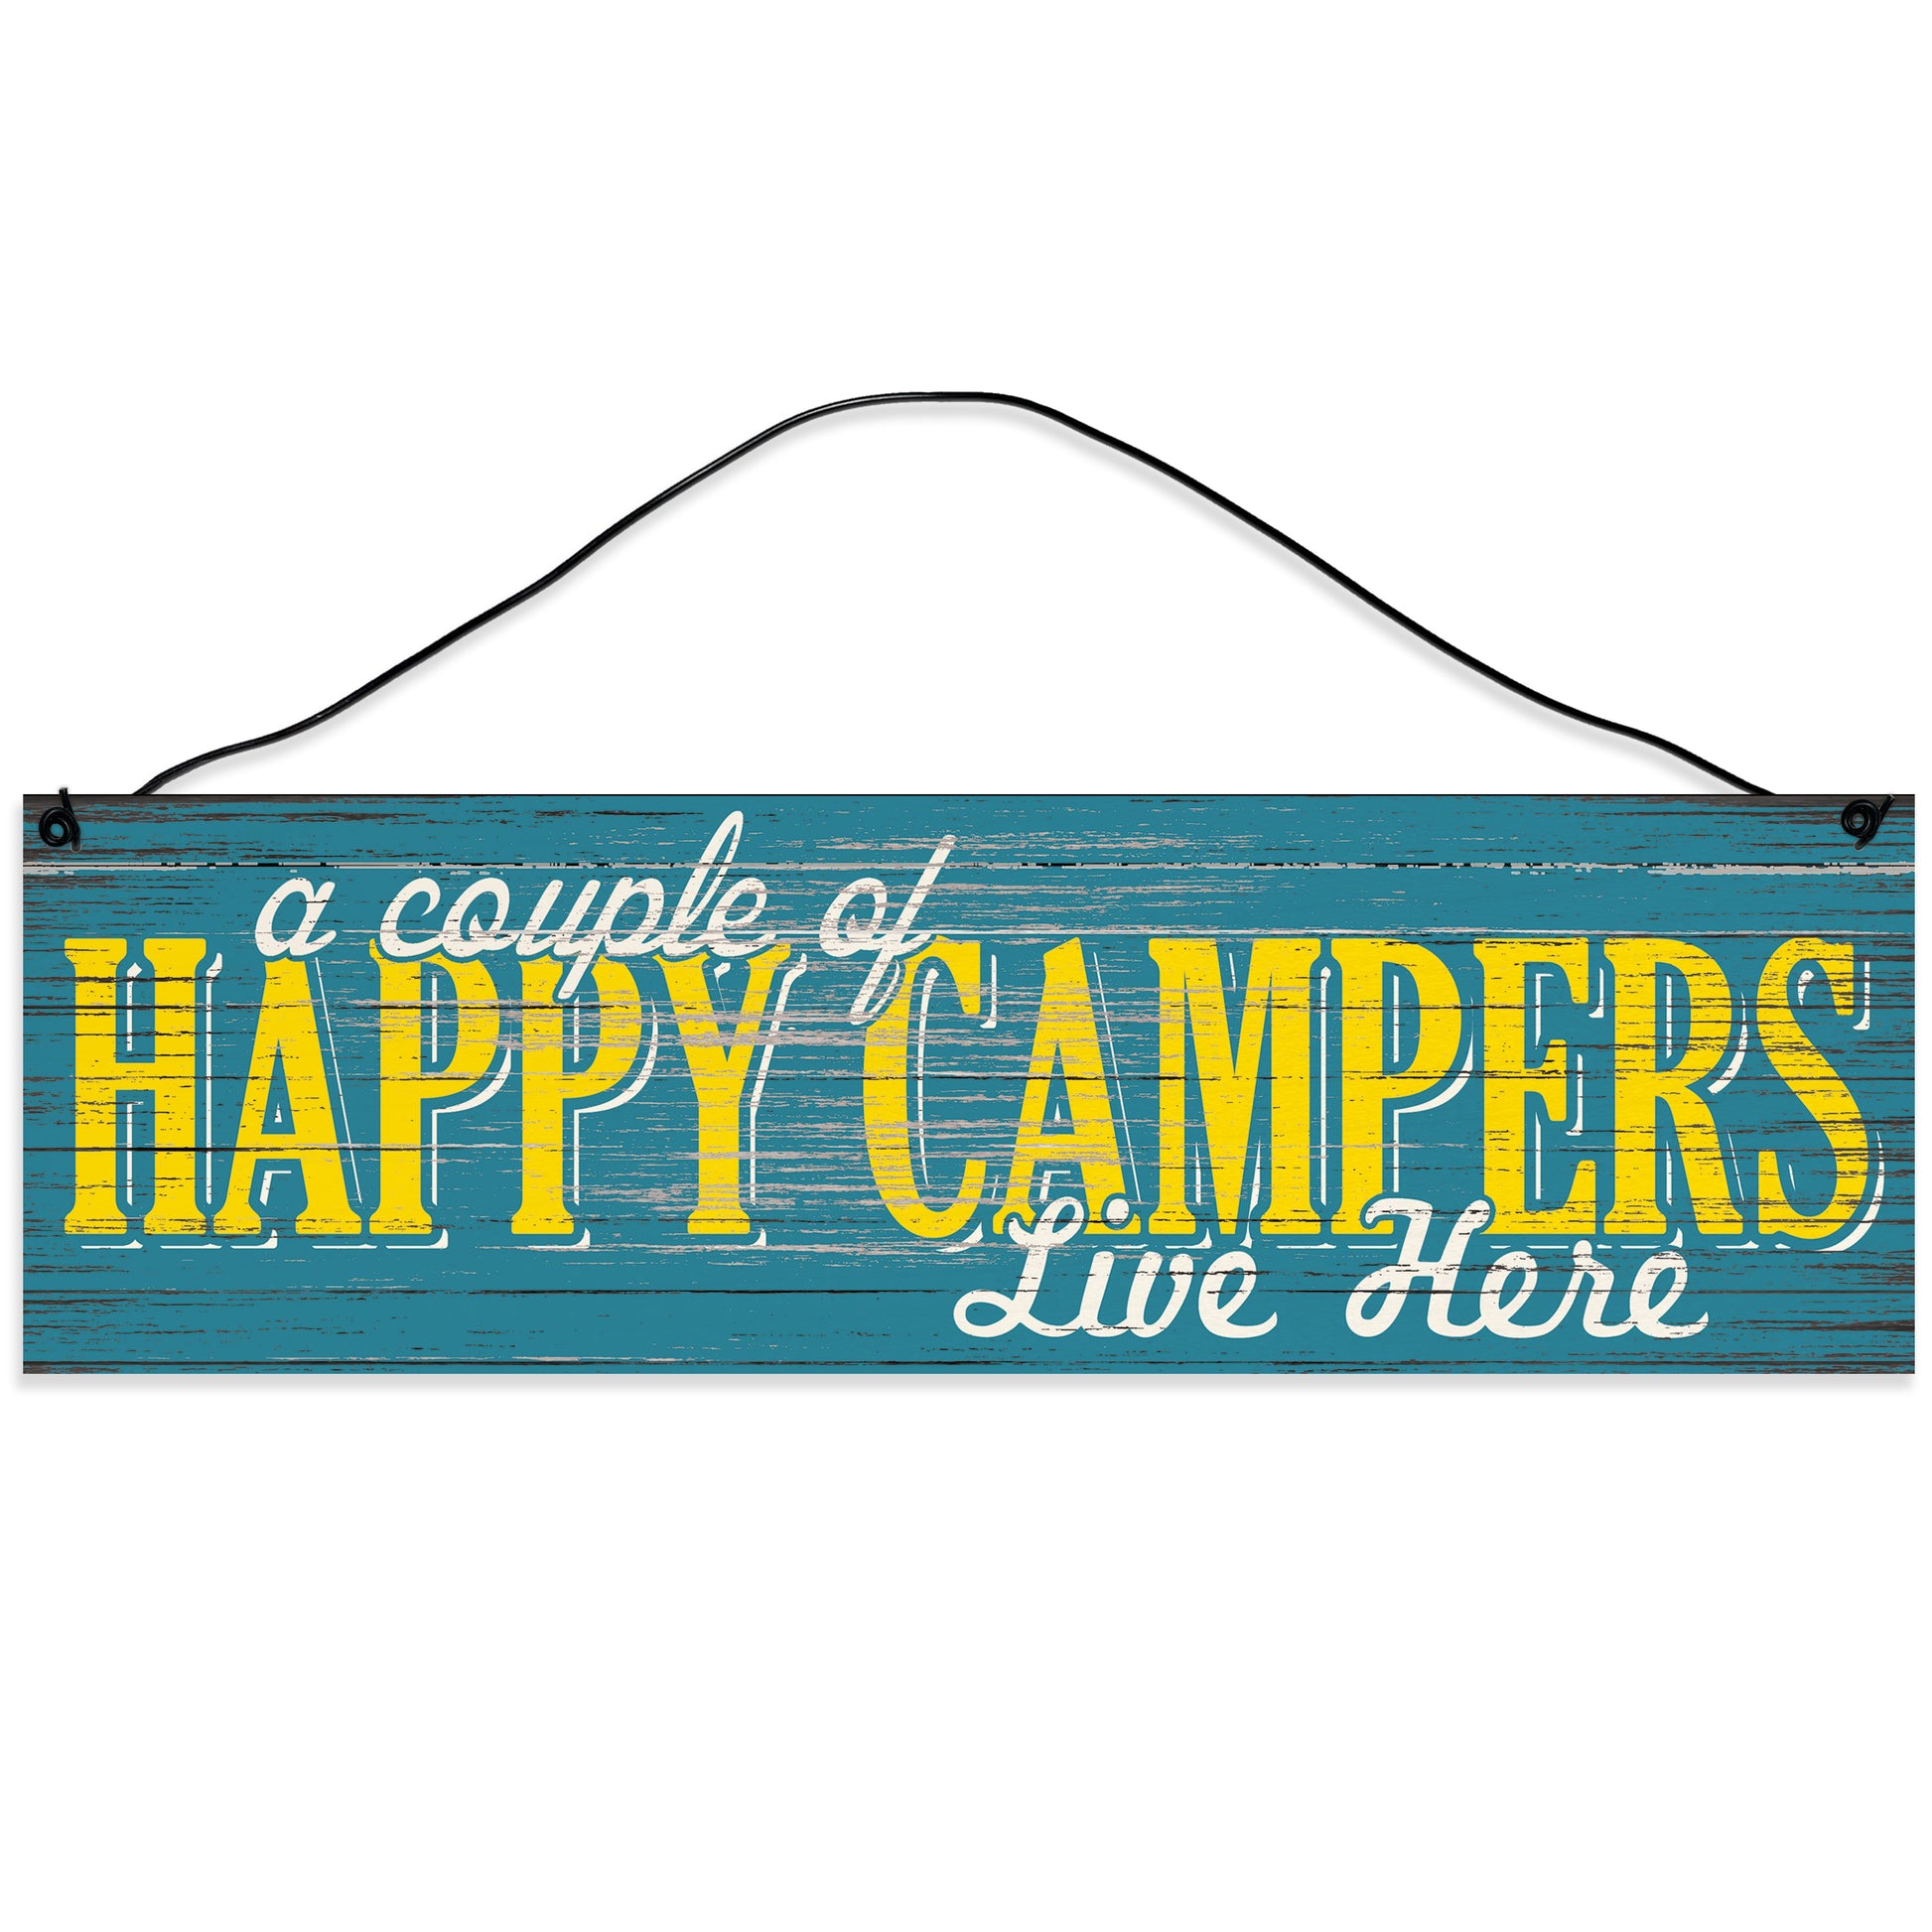 Sawyer's Mill - A Couple of Happy Campers Live Here. Wood Sign for Home or Office. Measures 3x10 inches.